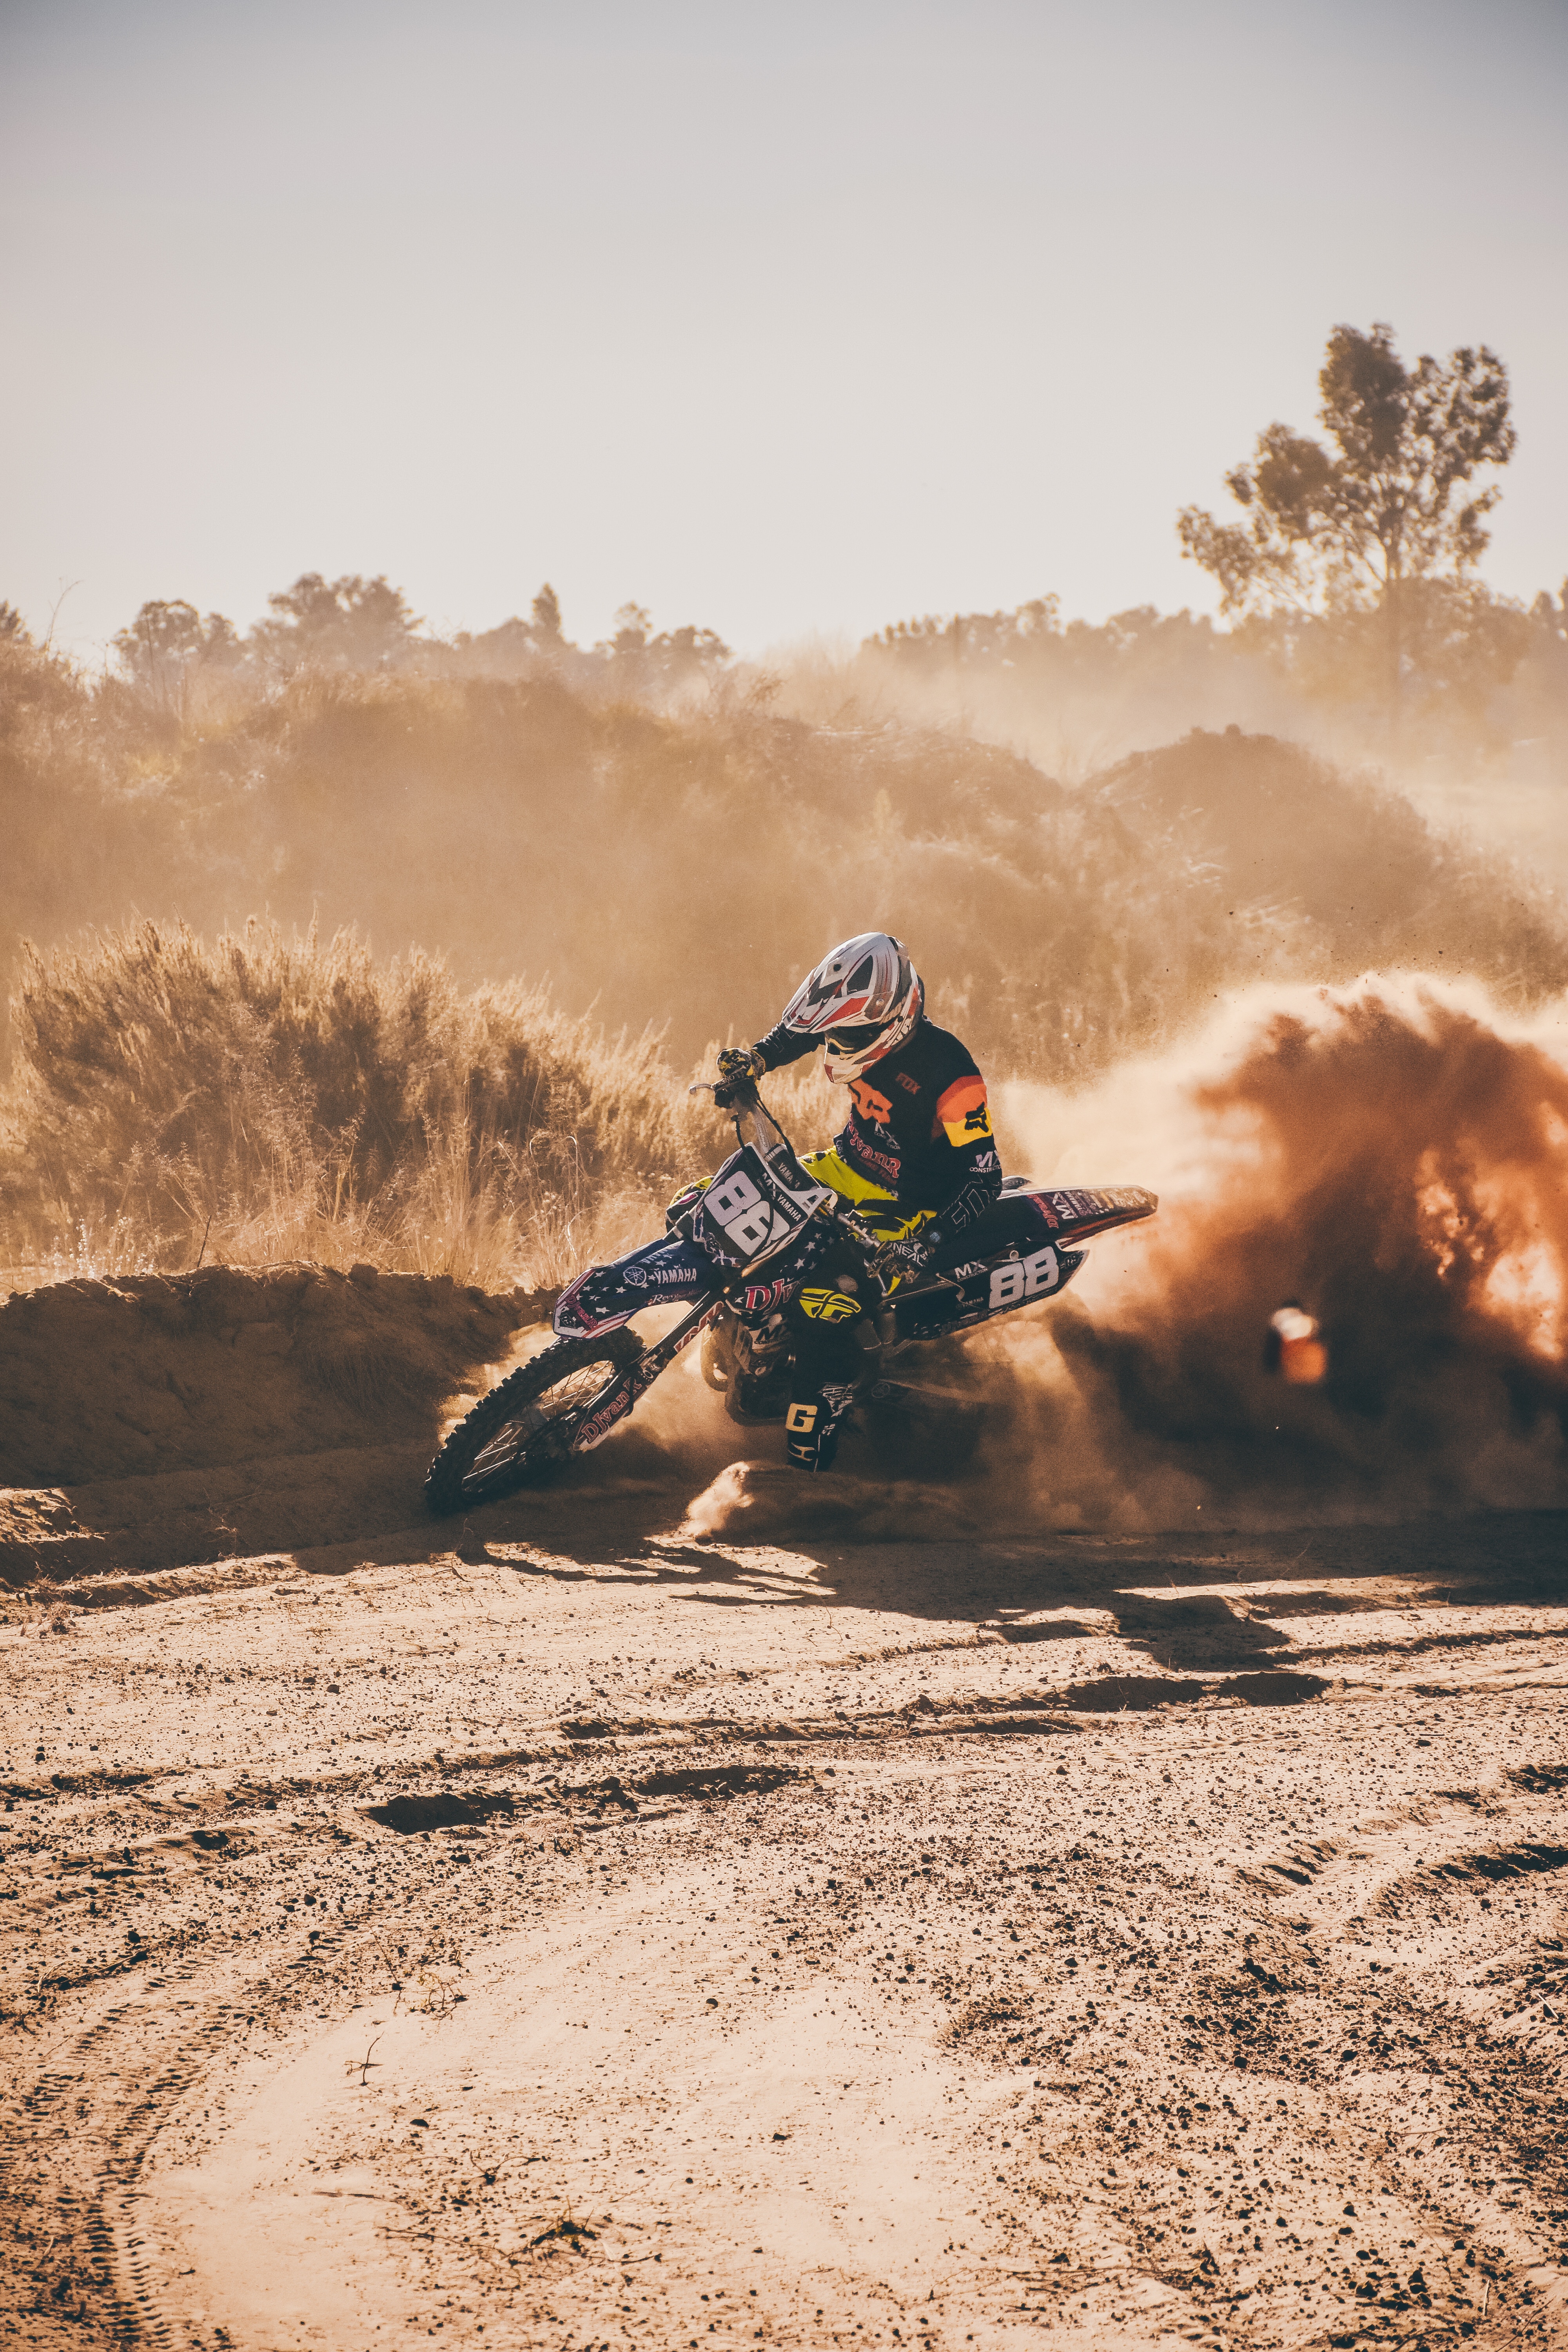 sports, races, rally, motorcyclist, motorcycle, off-road, impassability, drift HD wallpaper